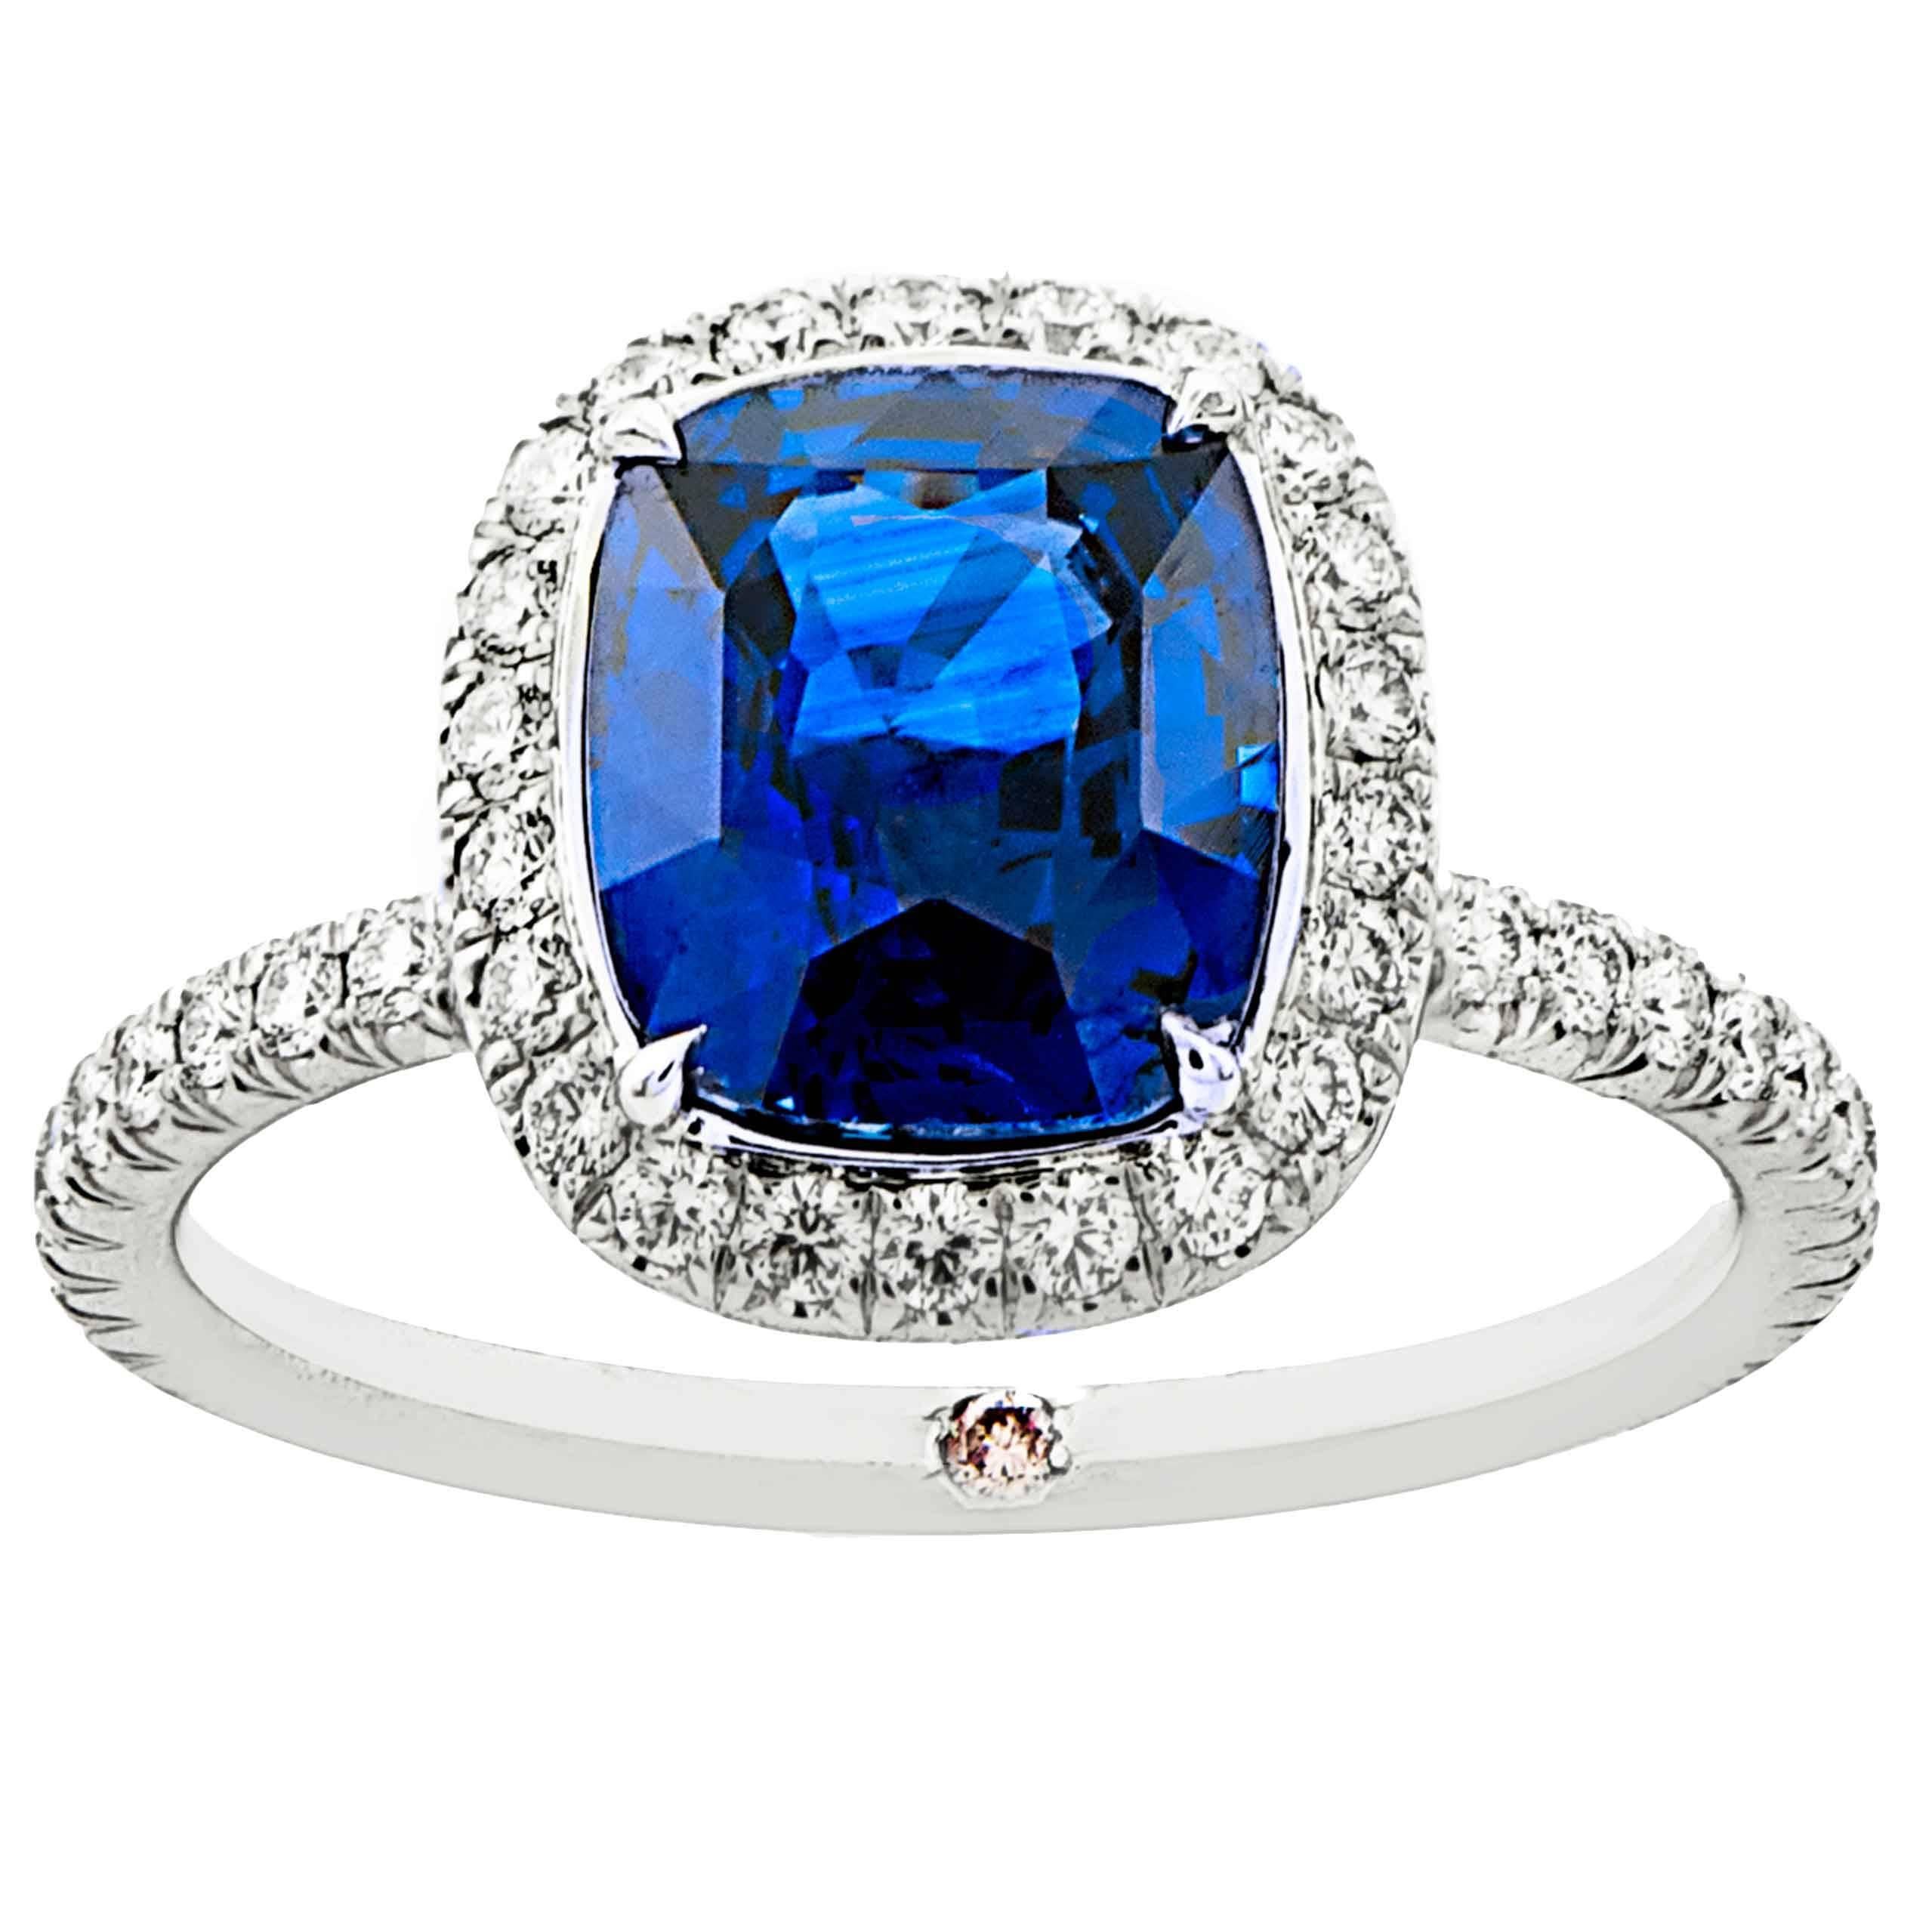 Marisa Perry Cornflower Blue Sapphire and Micro Pave Diamond Ring in Platinum For Sale